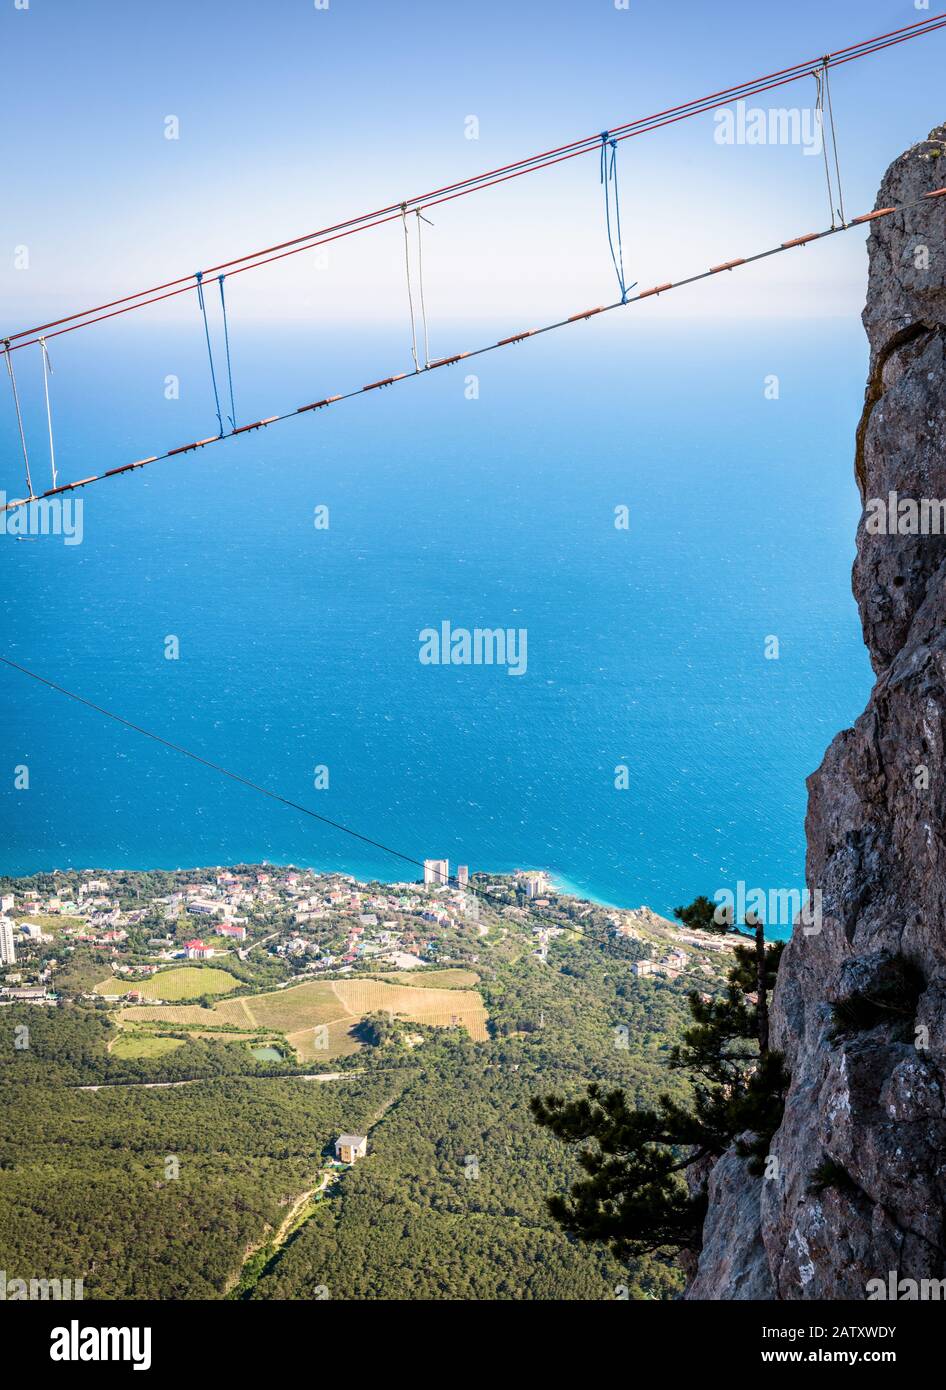 Rope bridge on the Mount Ai-Petri above chasm, Crimea, Russia. This mountain is one of the main tourist attractions of Crimea. Hanging bridge over aby Stock Photo